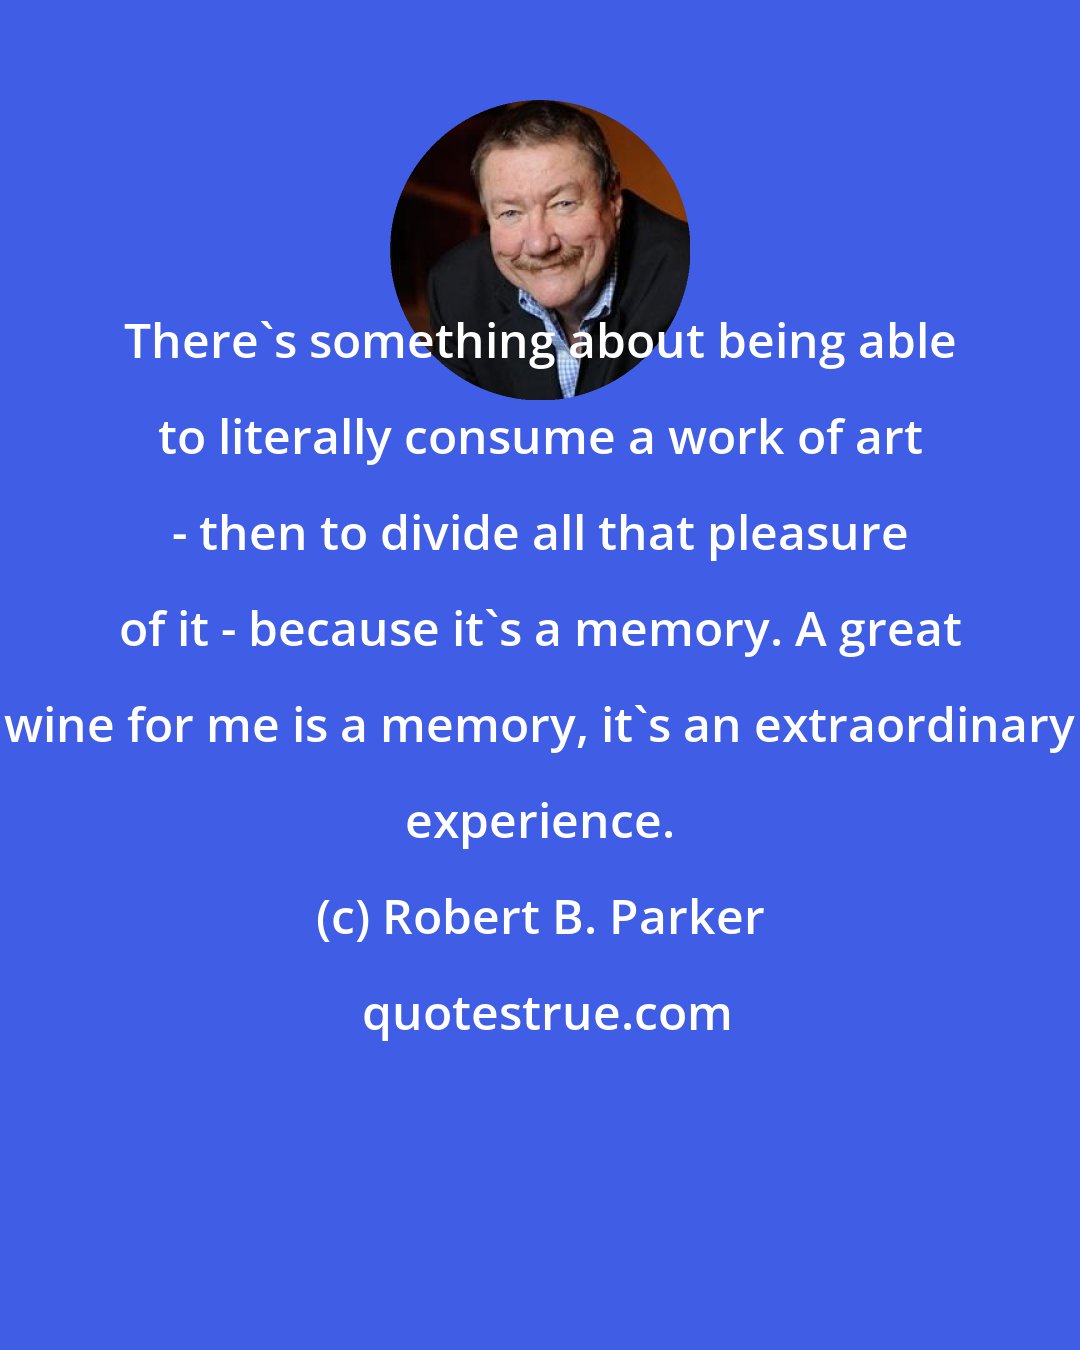 Robert B. Parker: There's something about being able to literally consume a work of art - then to divide all that pleasure of it - because it's a memory. A great wine for me is a memory, it's an extraordinary experience.